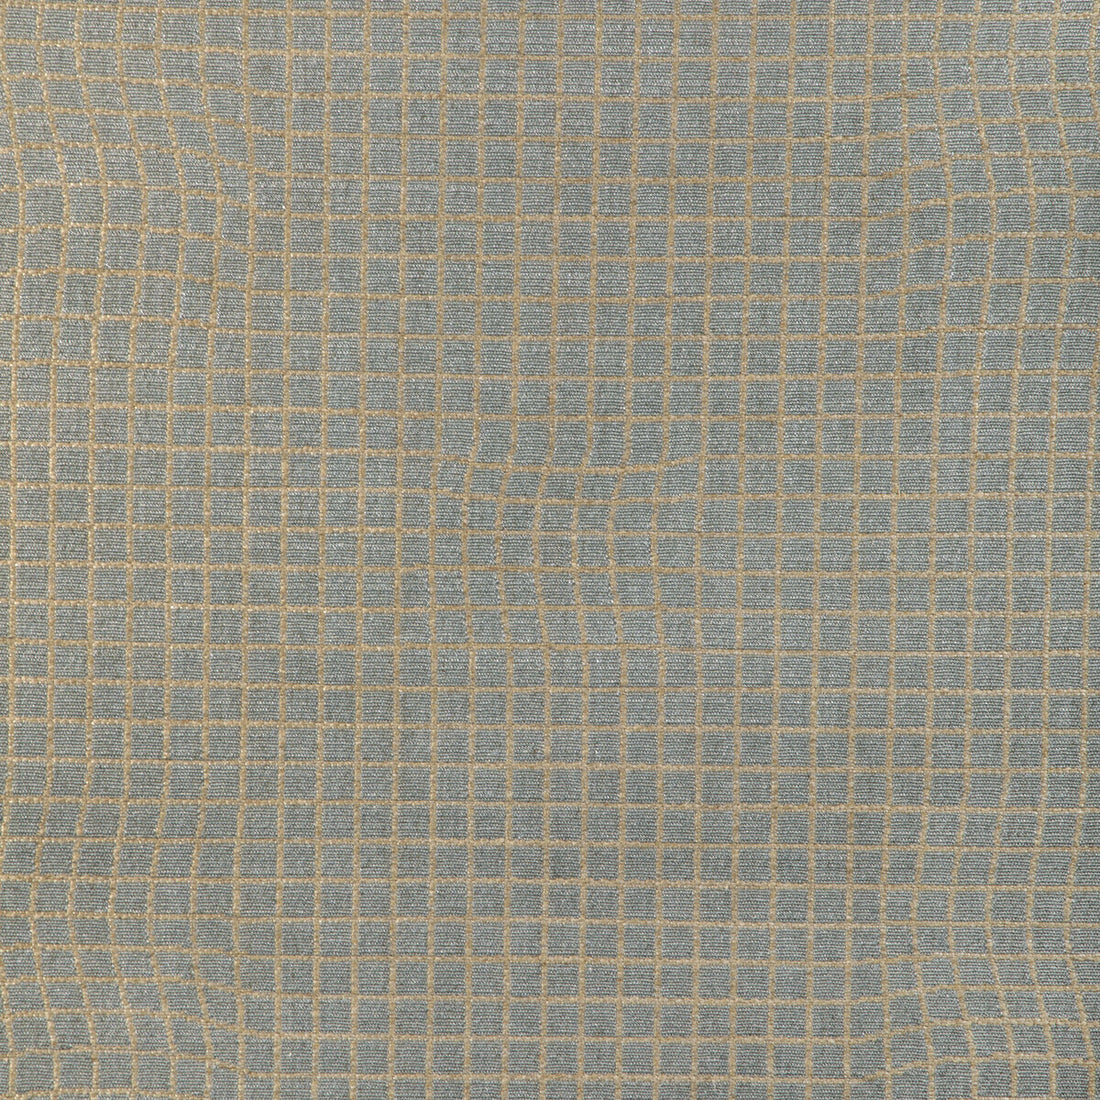 Armature fabric in graphite color - pattern GWF-3792.11.0 - by Lee Jofa Modern in the Kelly Wearstler VII collection